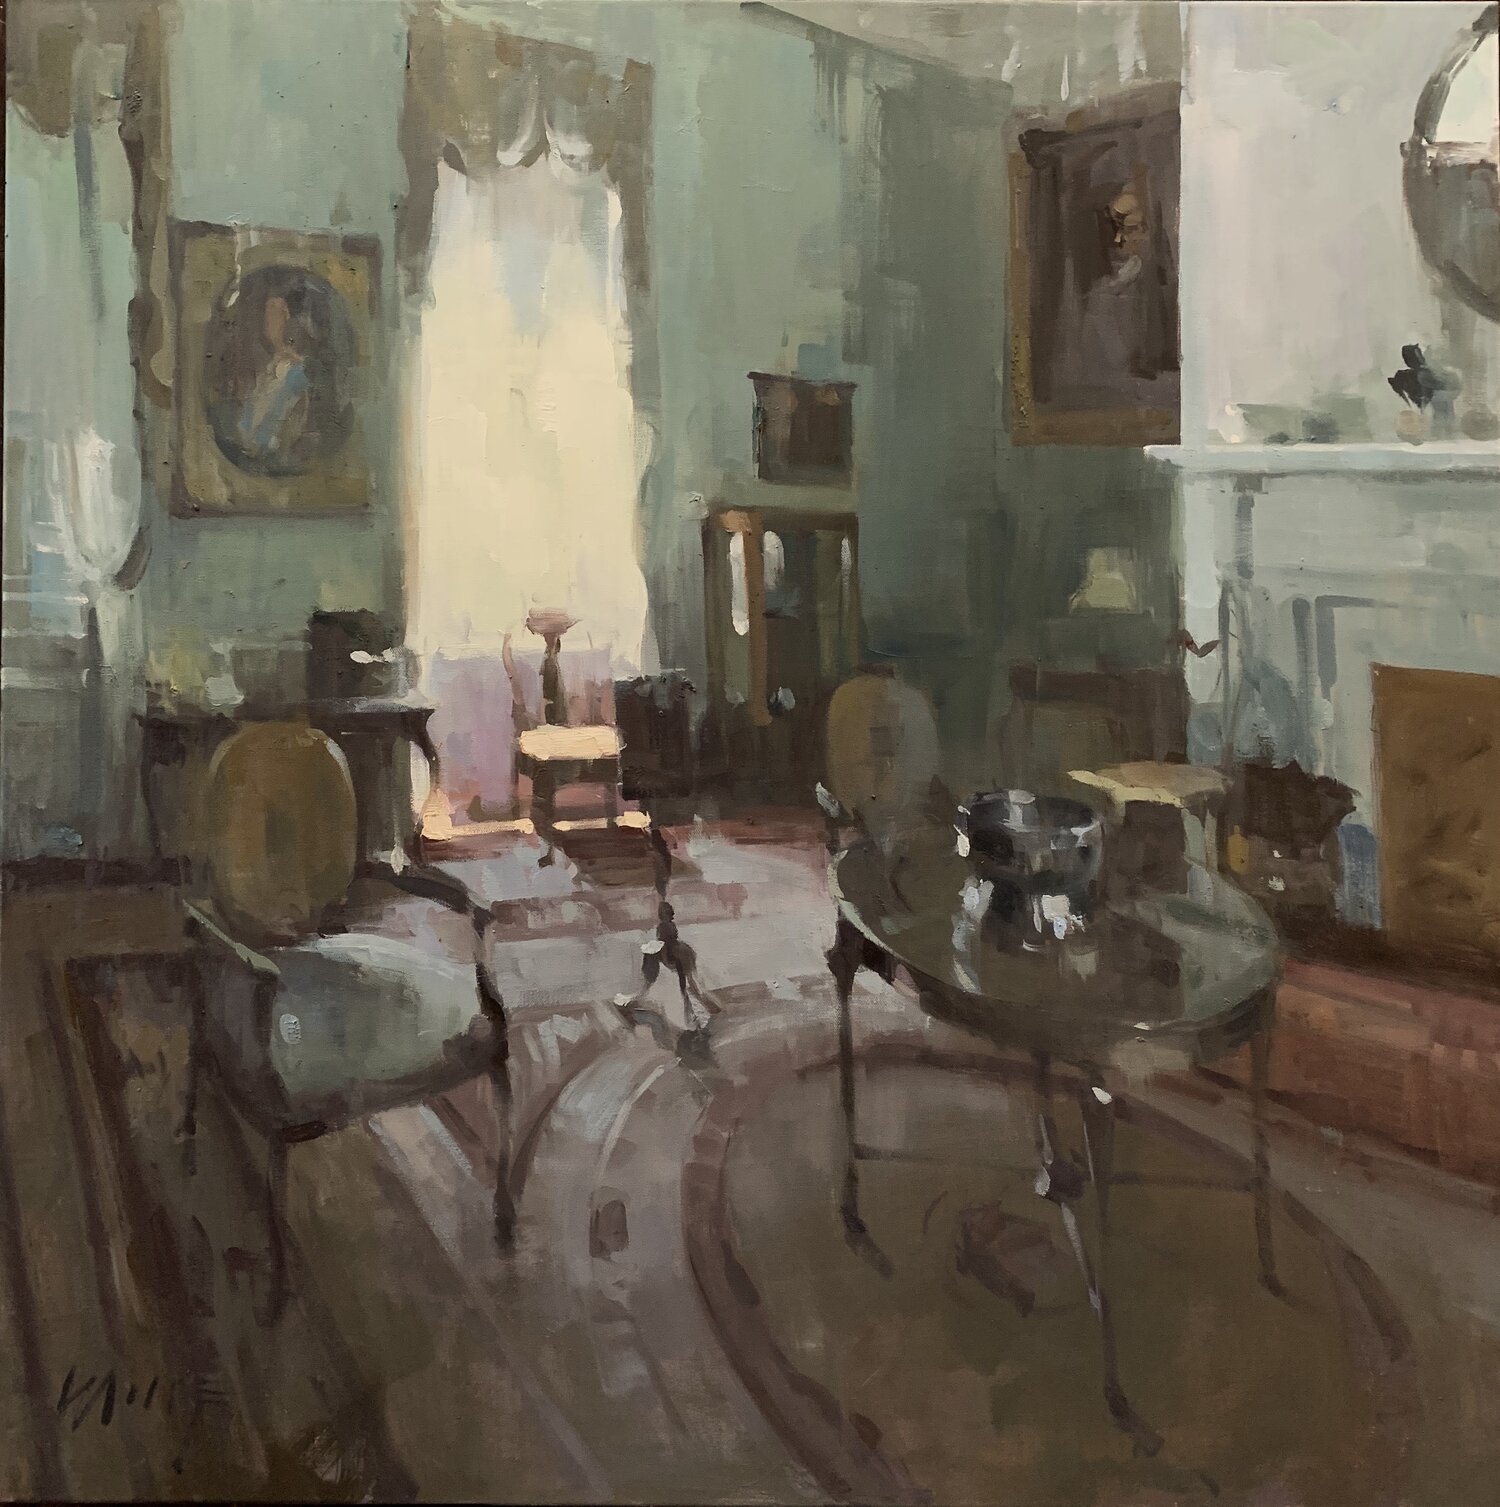 Larry Moore," Interior Without Animal," oil on canvas, 30 x 36 in. - Larry Moore